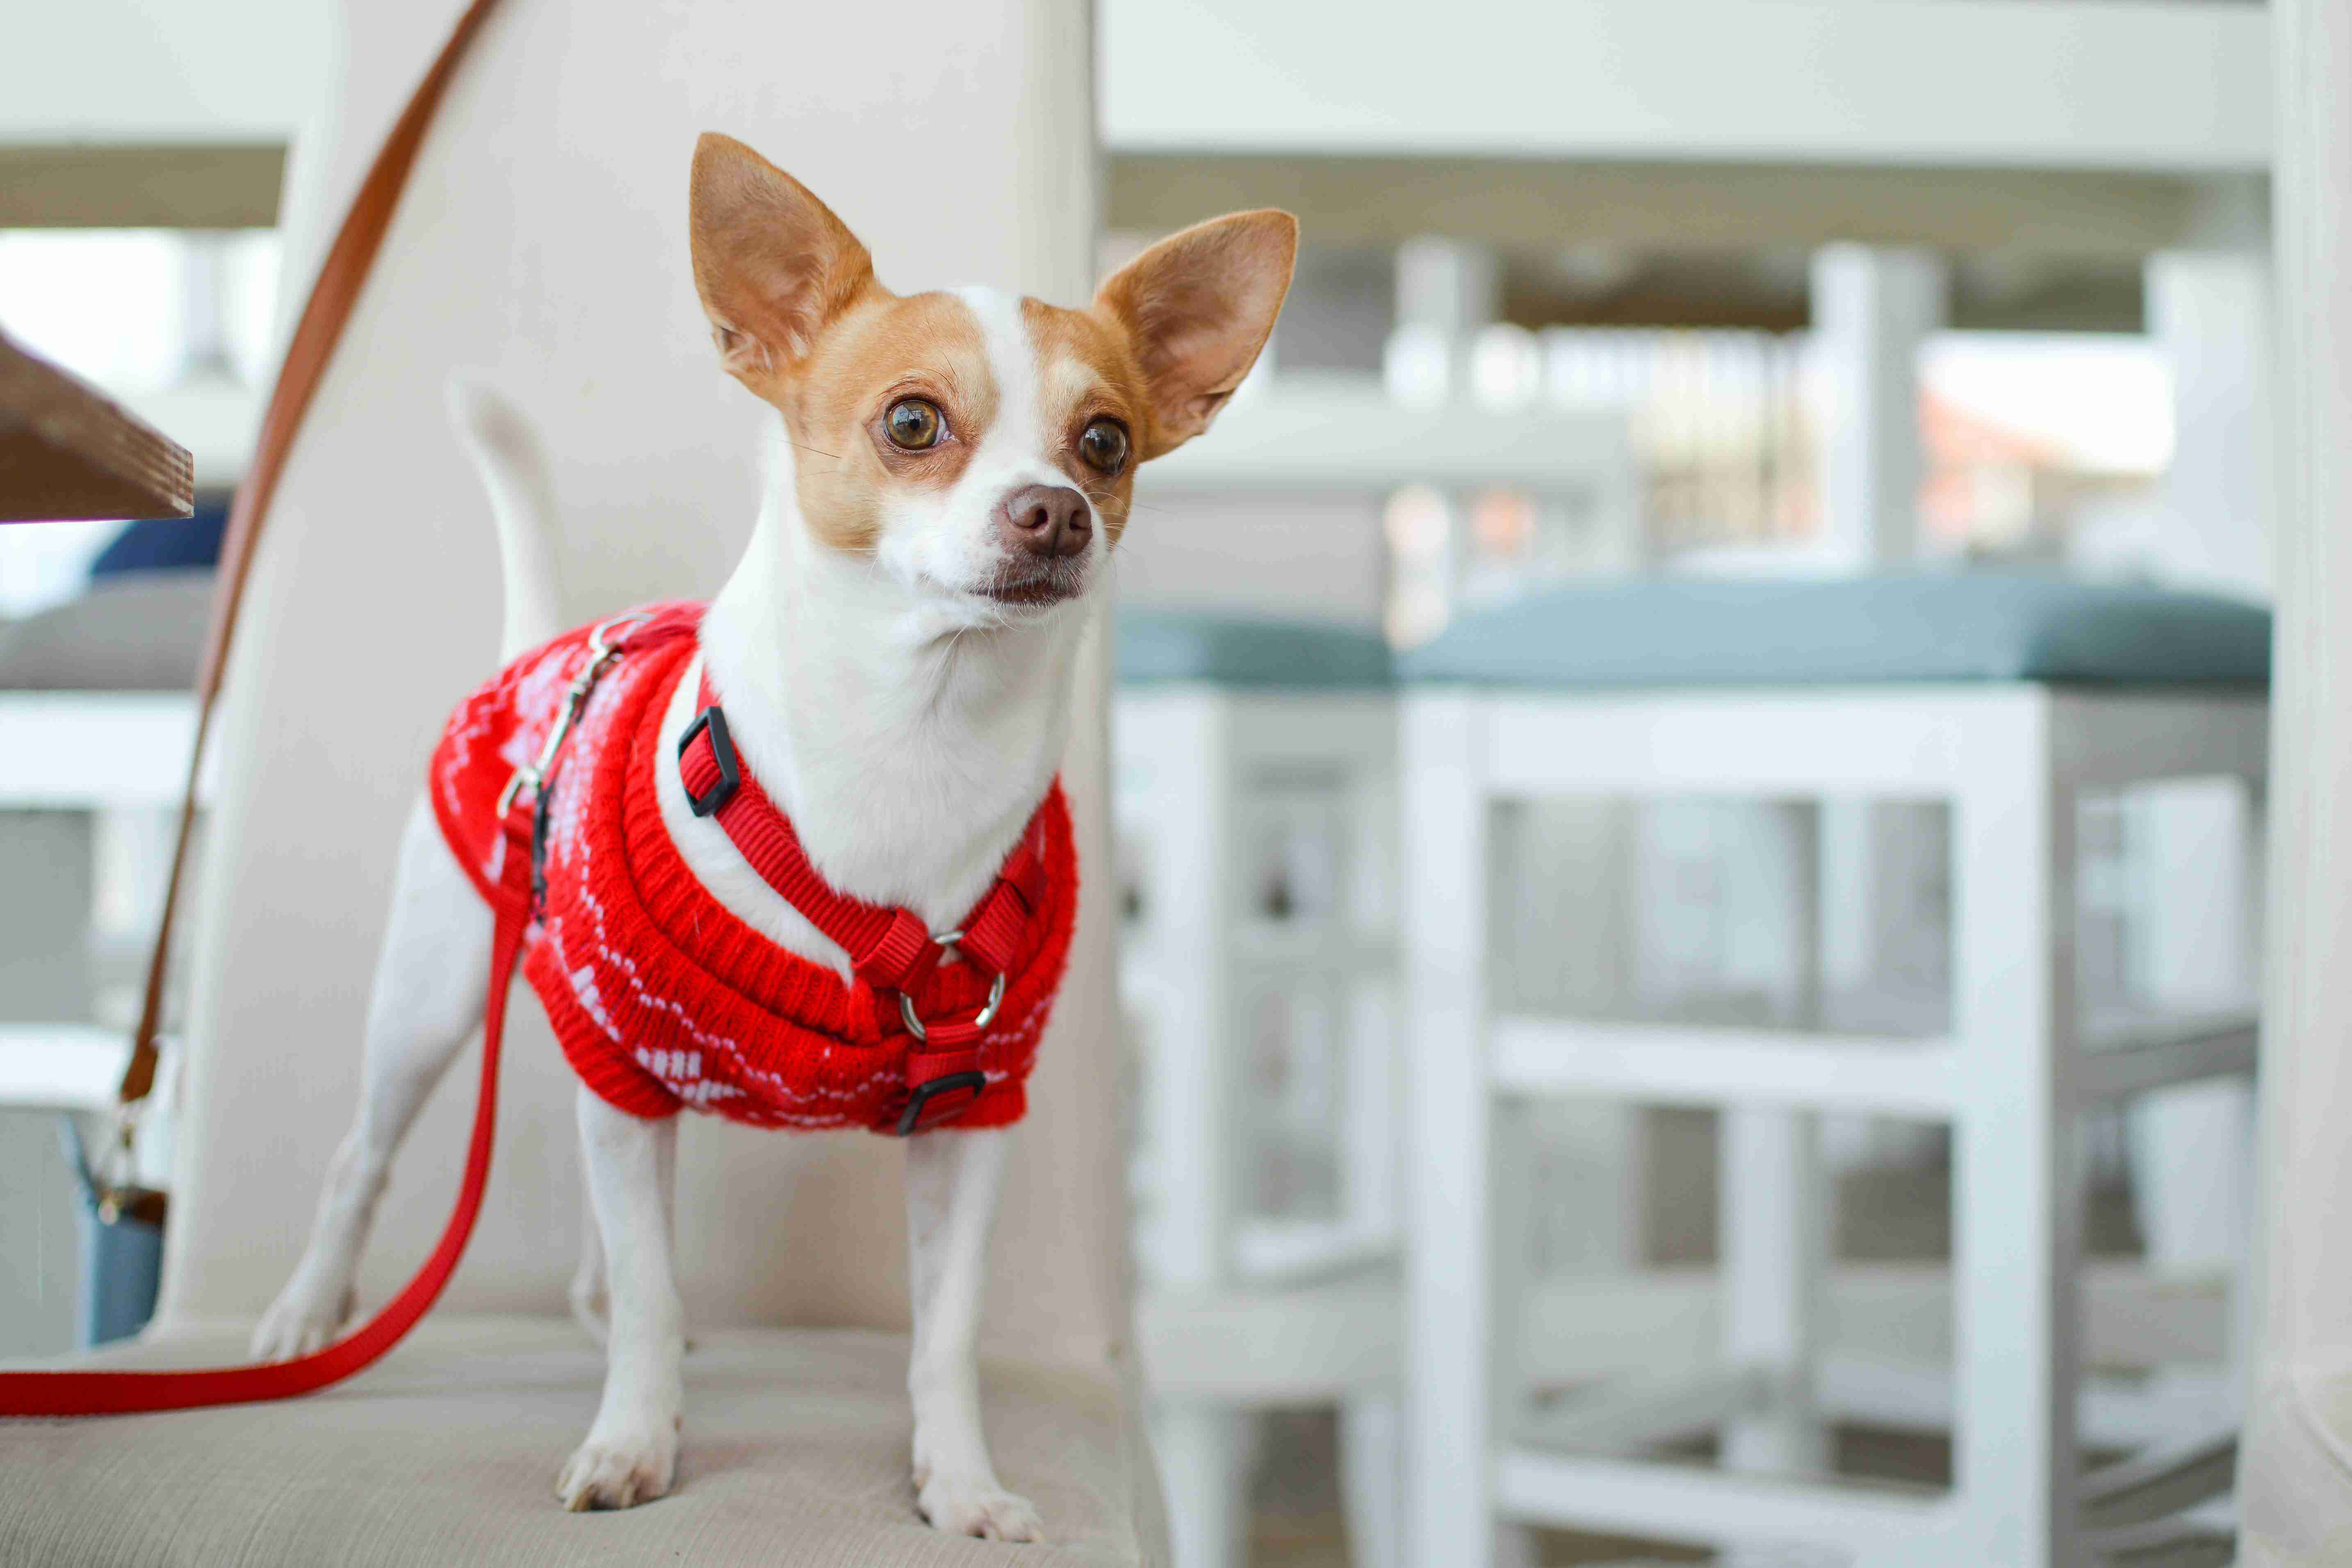 Can anger issues in Chihuahuas be a result of a lack of exercise or mental stimulation?